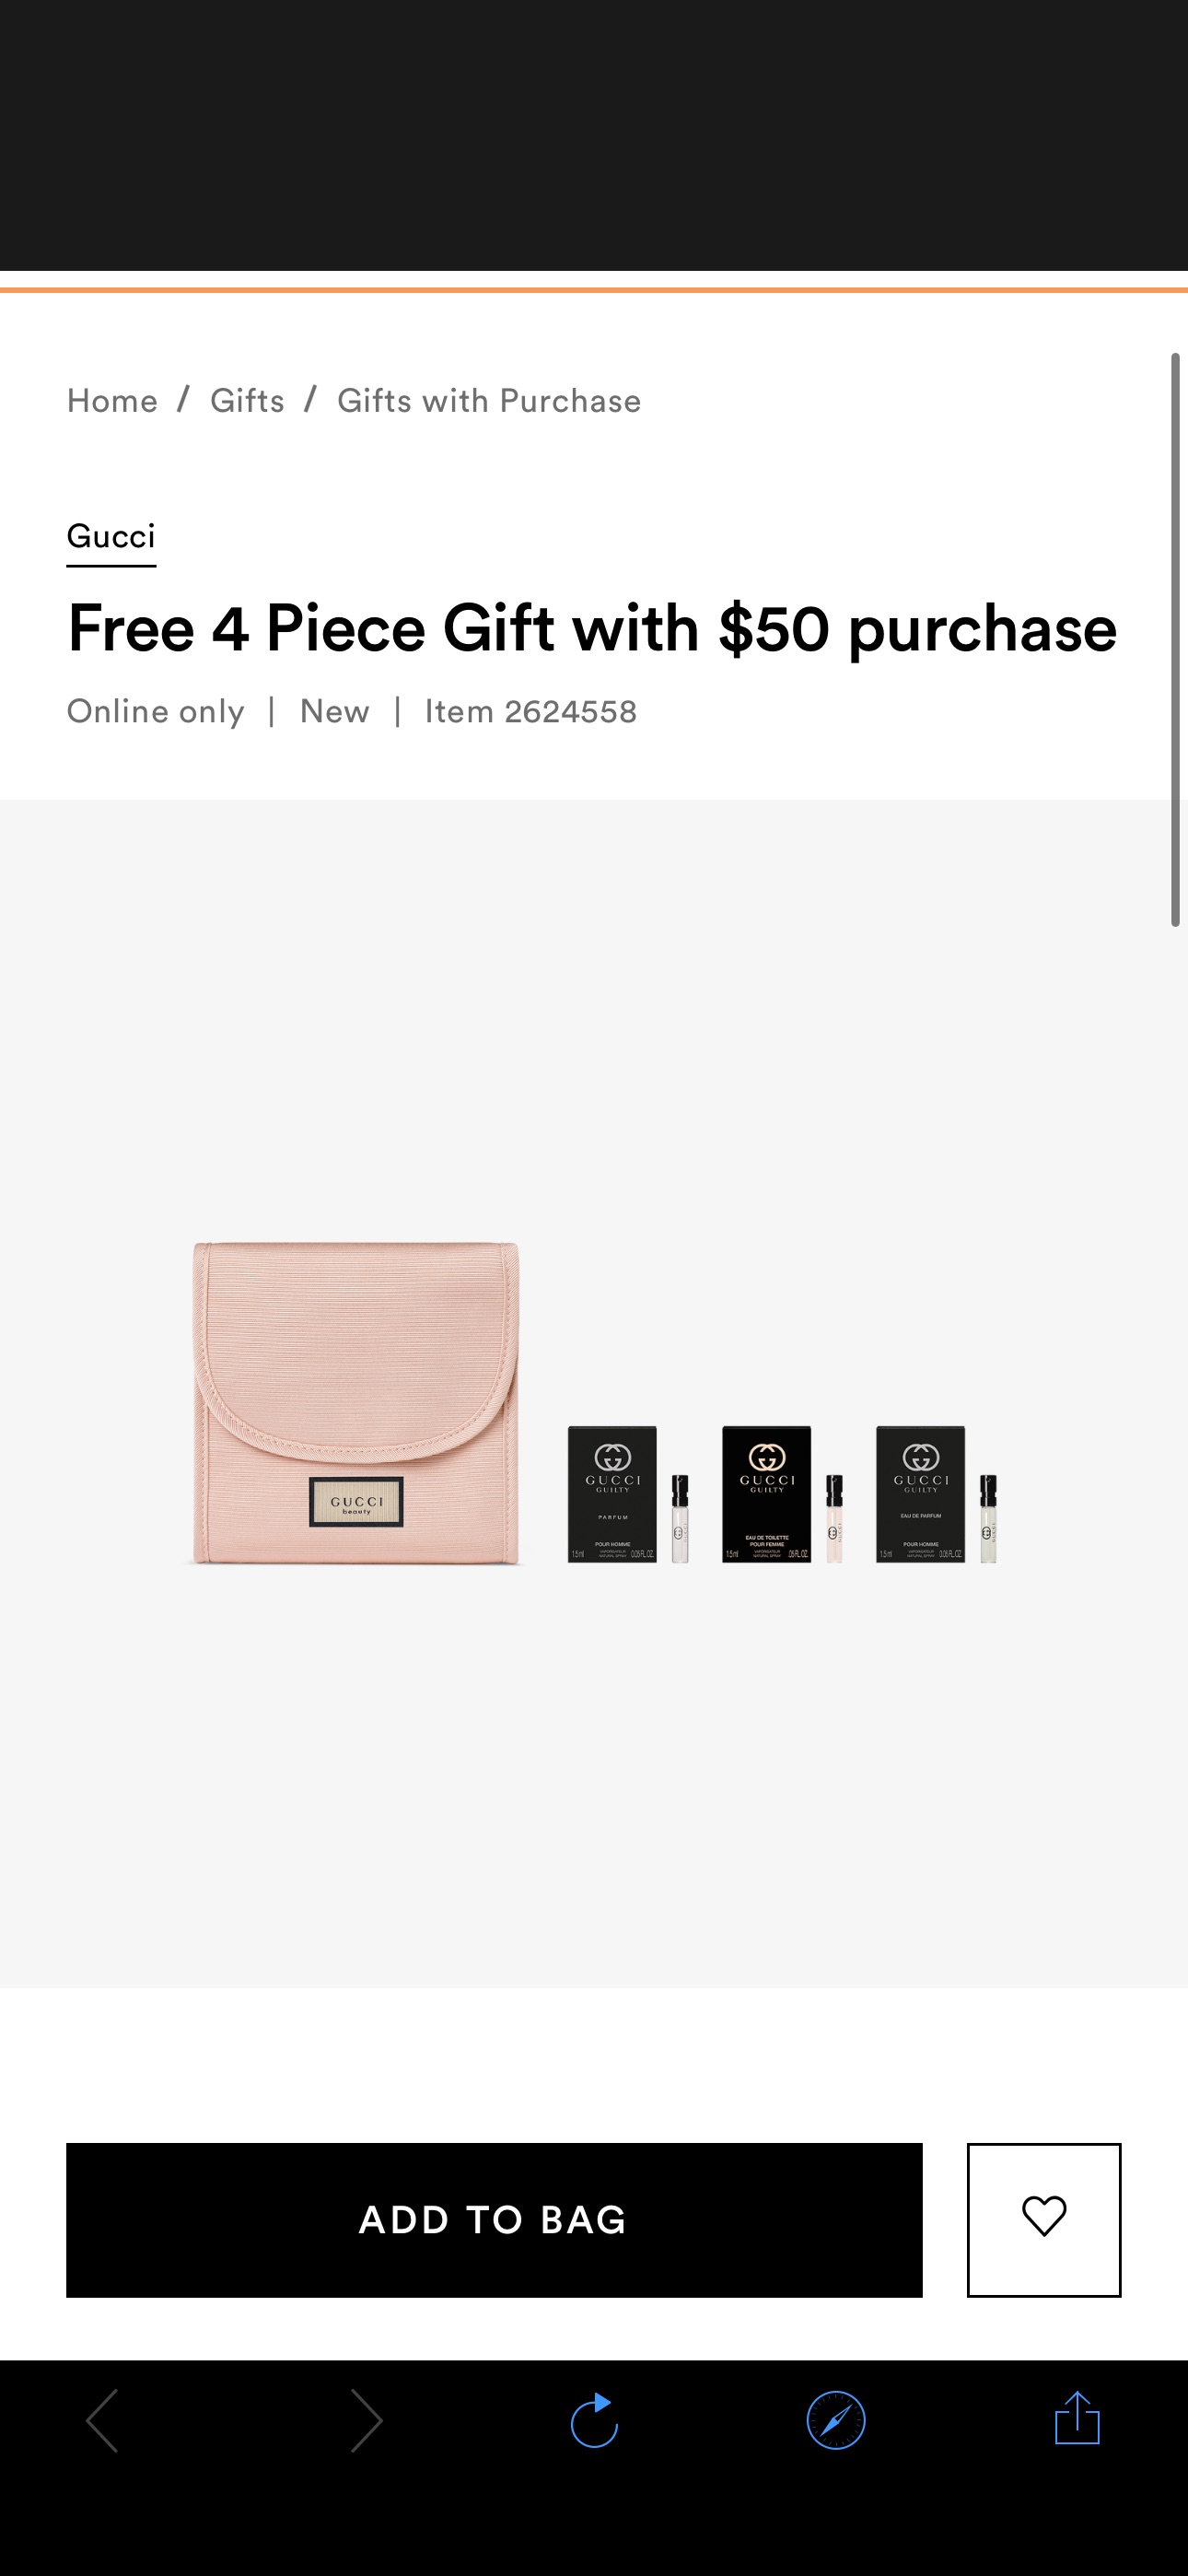 Free 4 Piece Gift with $50 purchase - Gucci | Ulta Beauty